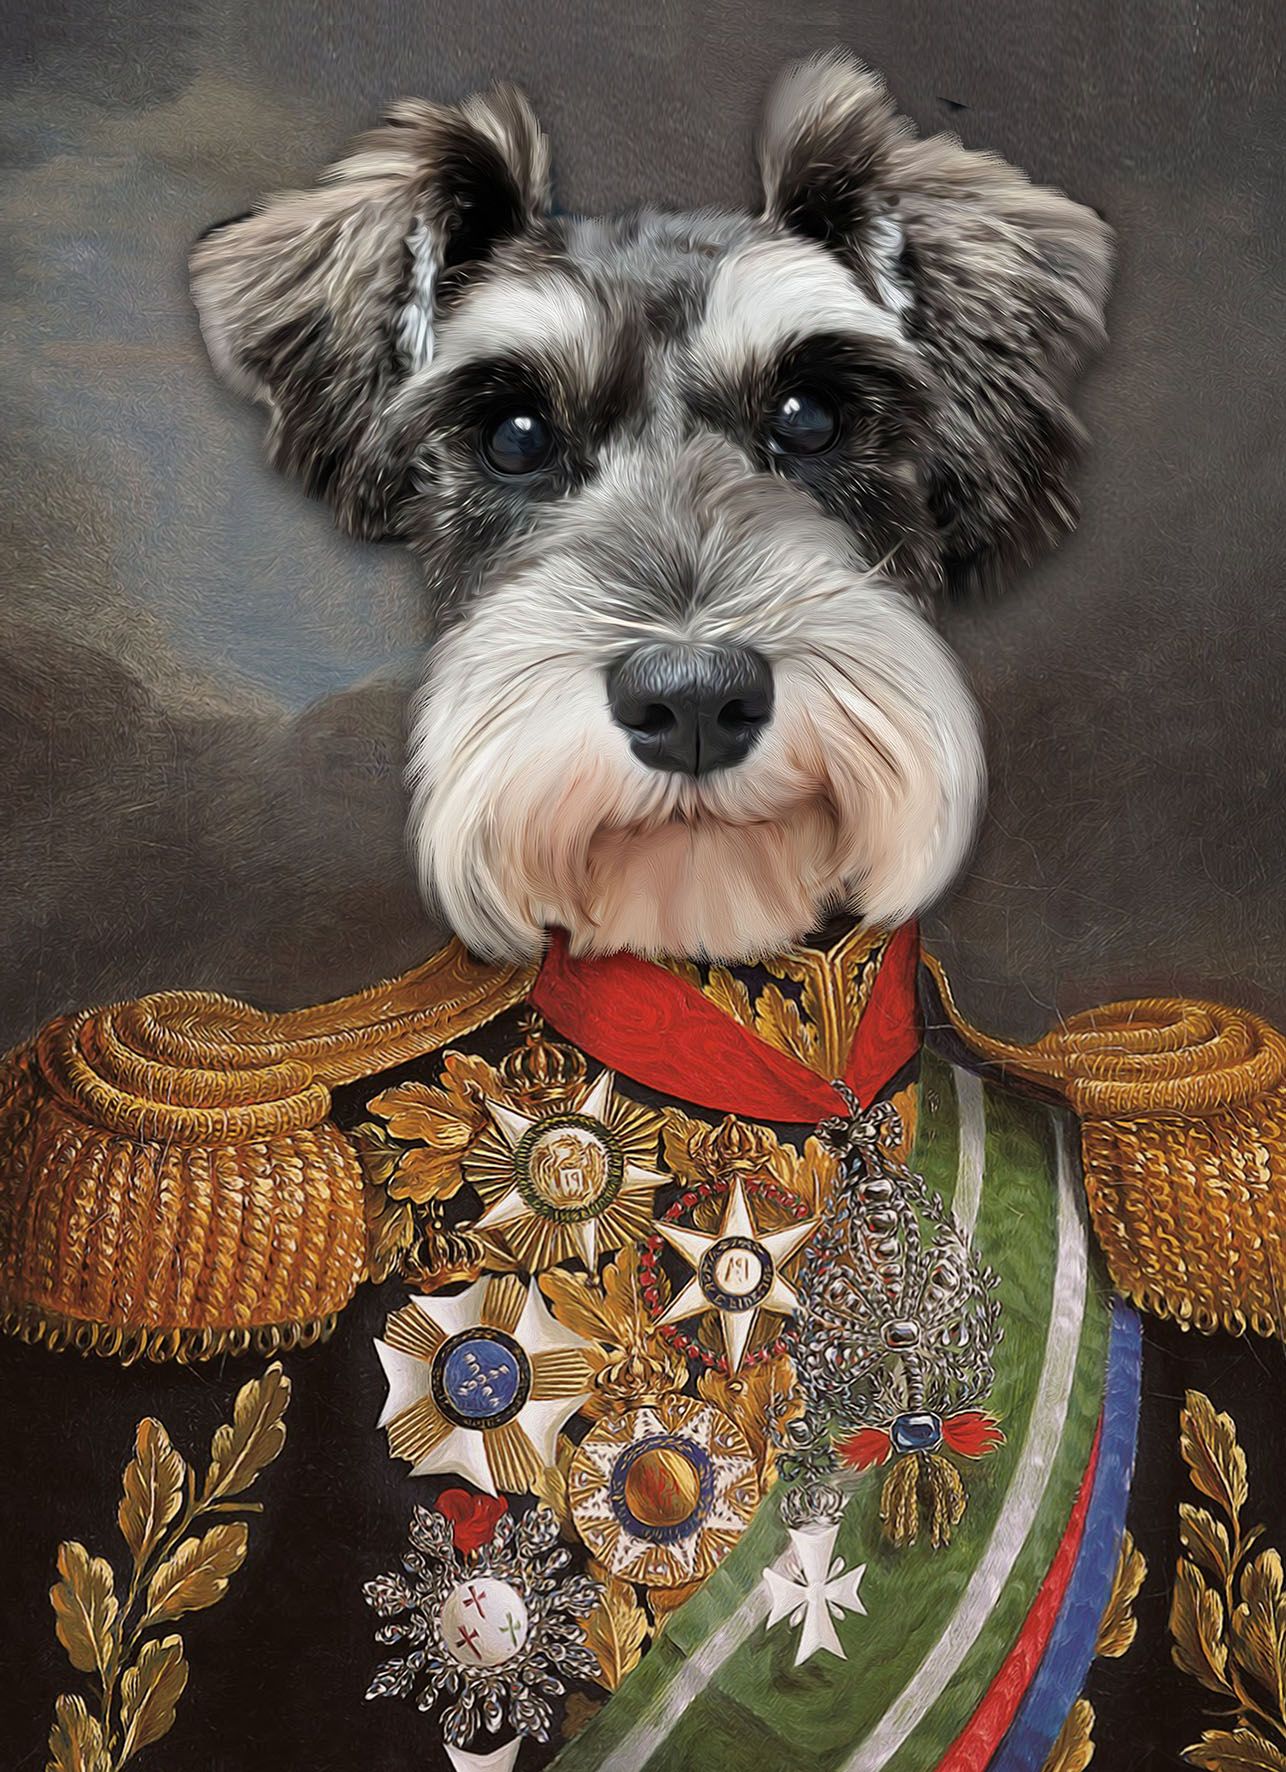 A buyer’s guide to custom pet portrait